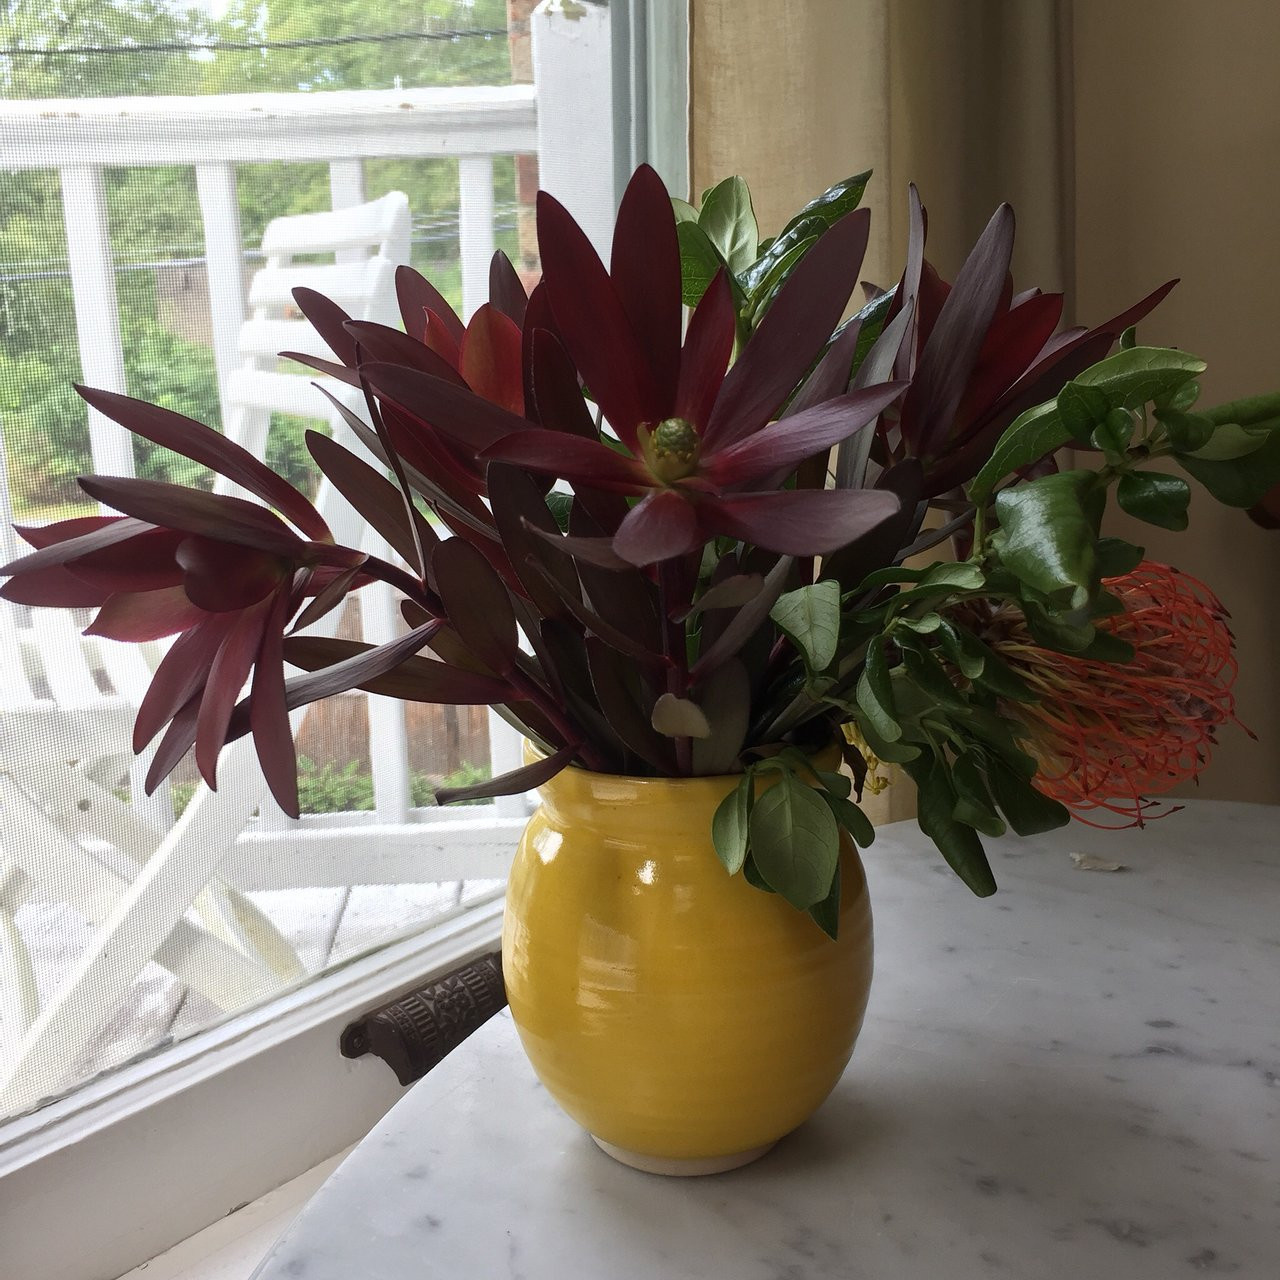 21 Lovely Red Wing Vase 2024 free download red wing vase of blue barn bnb updated 2018 prices bb reviews millbrook ny for blue barn bnb updated 2018 prices bb reviews millbrook ny tripadvisor